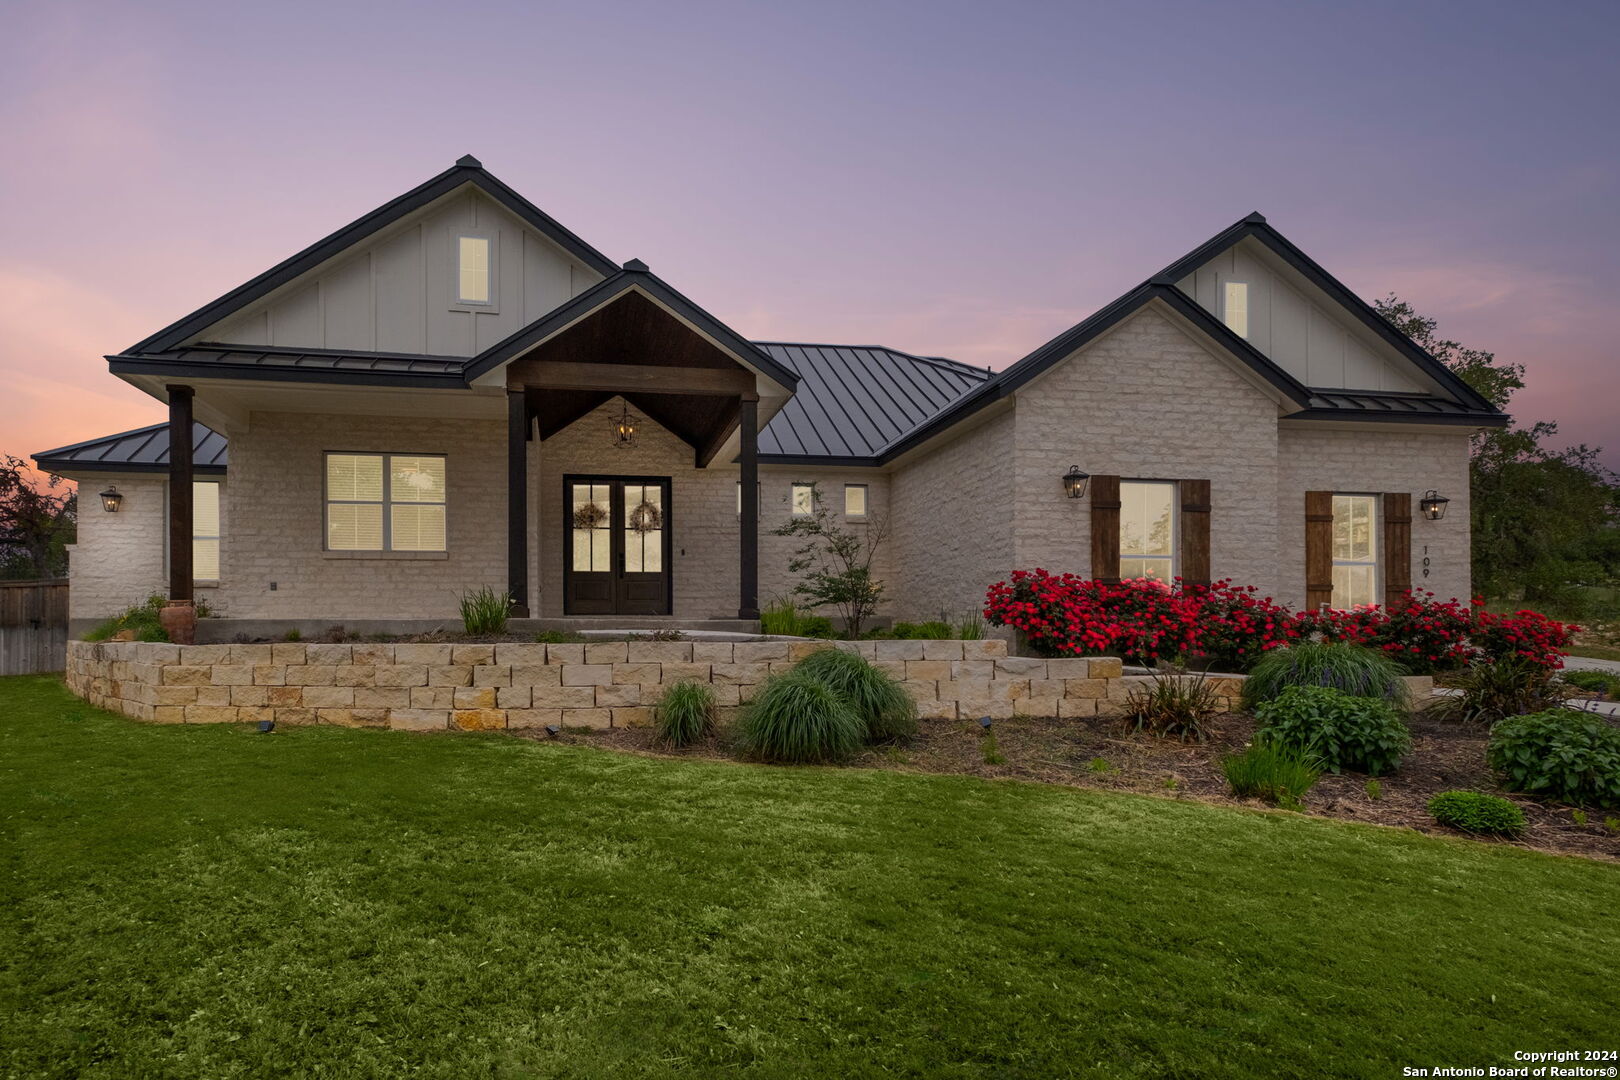 Photo of 109 Creede St in Boerne, TX